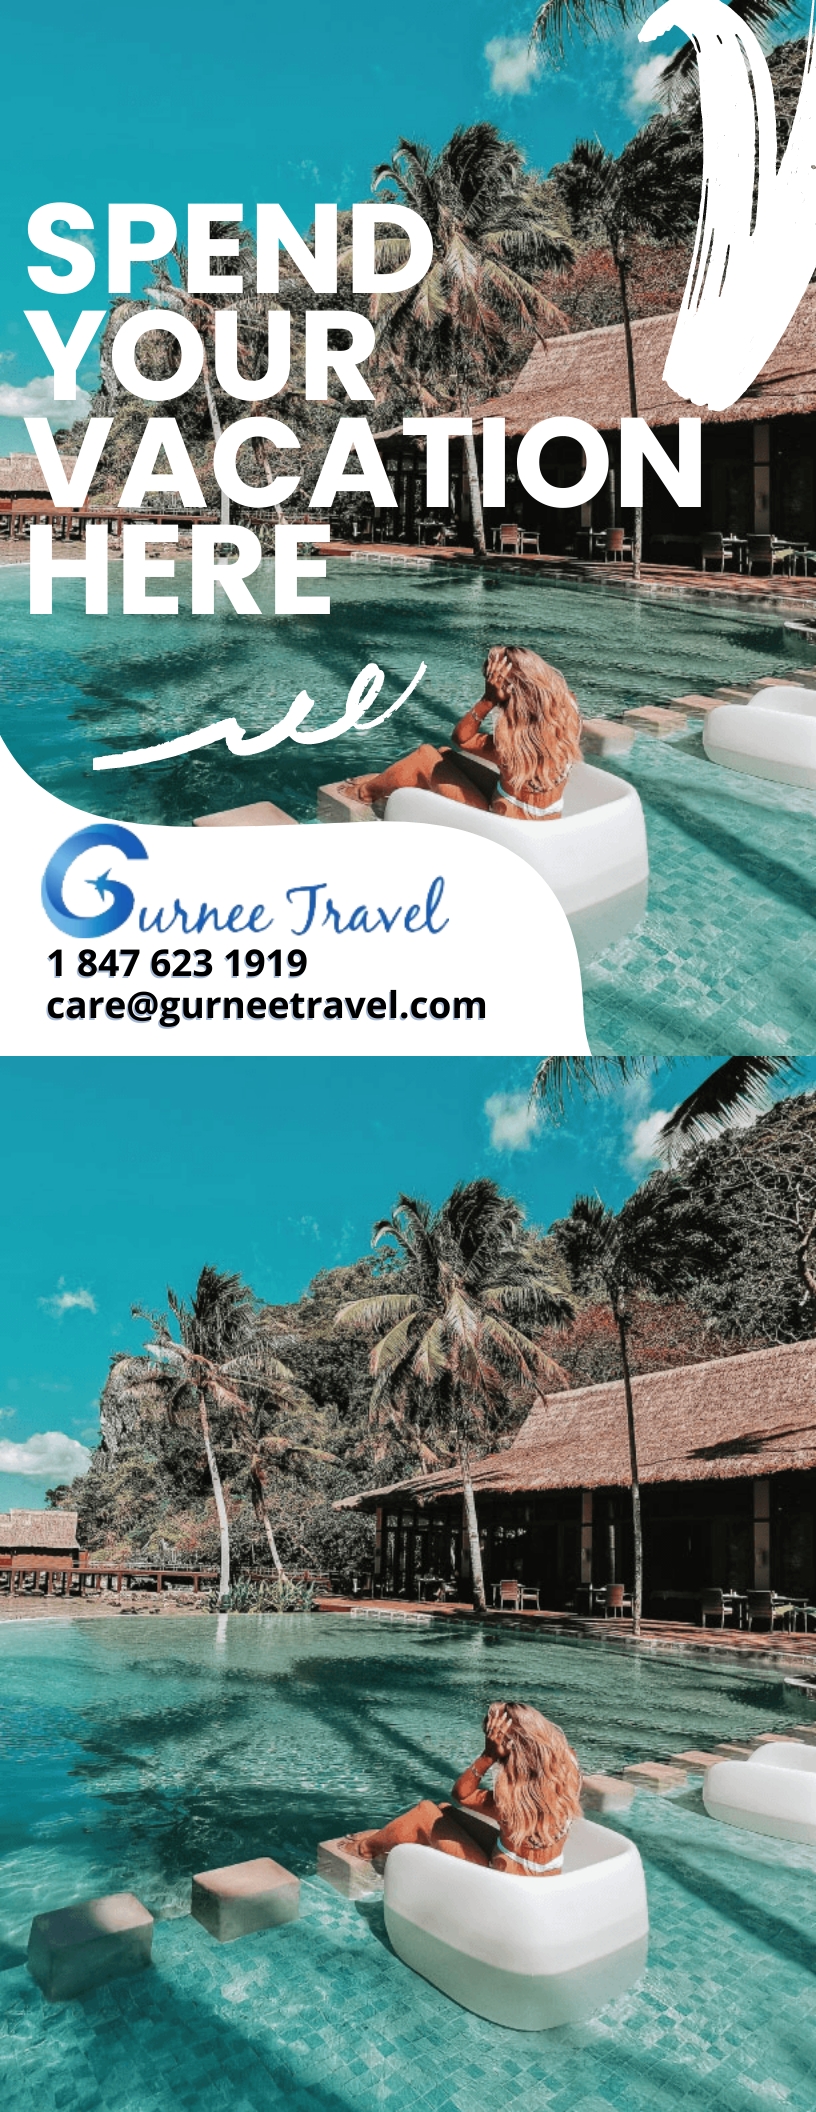 Free Vacation Flyer Template